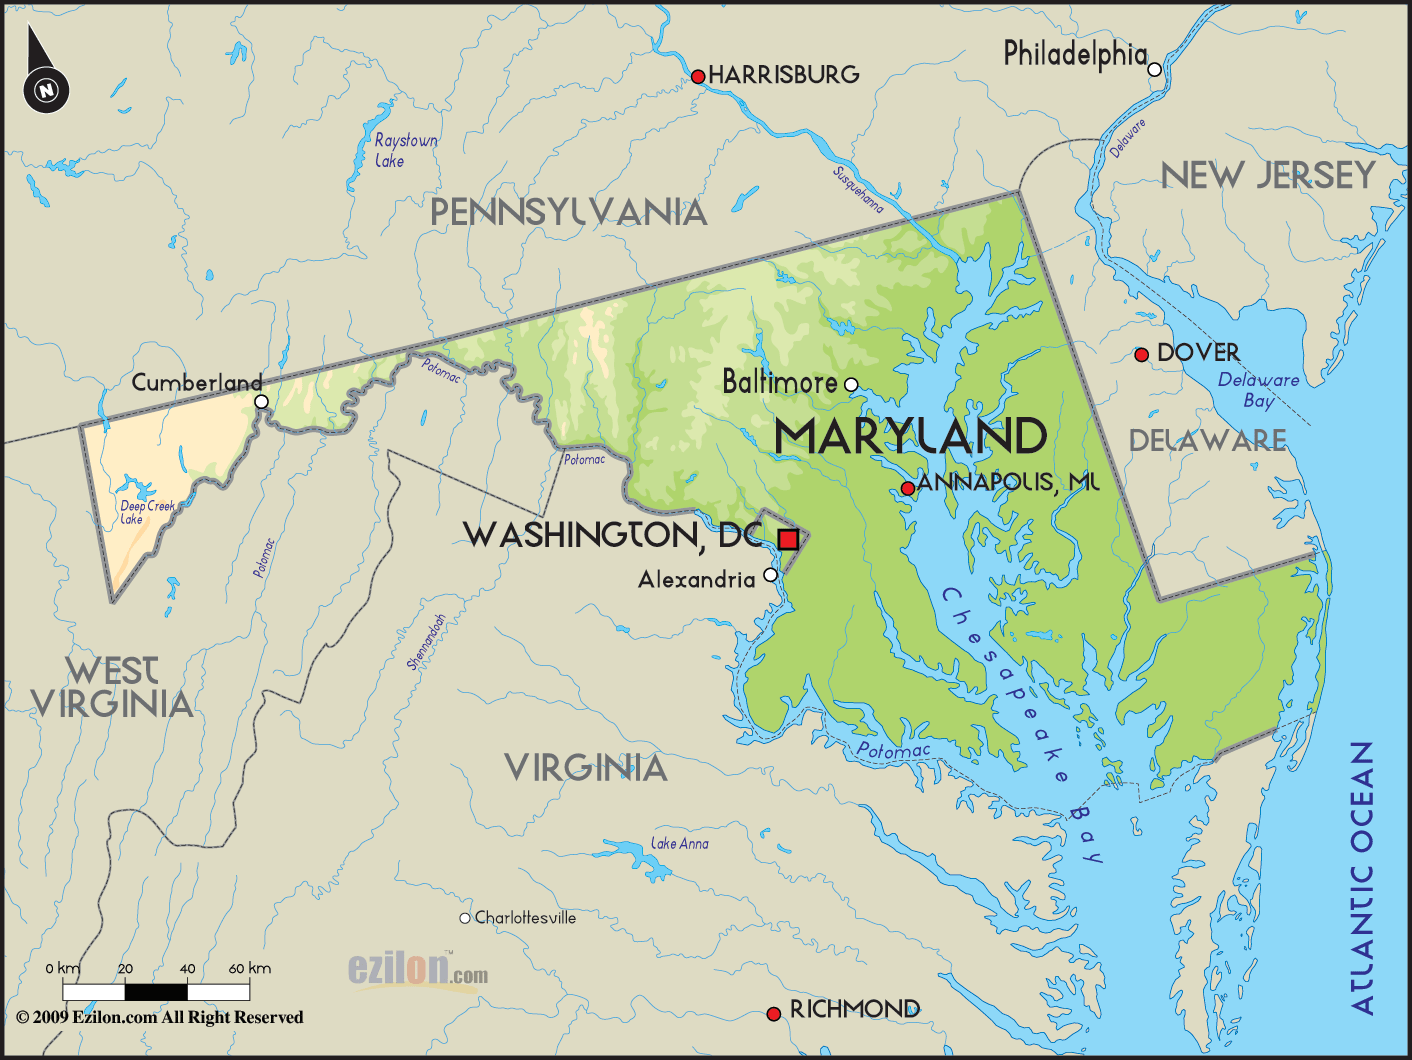 geographical-map-of-maryland-and-maryland-geographical-maps